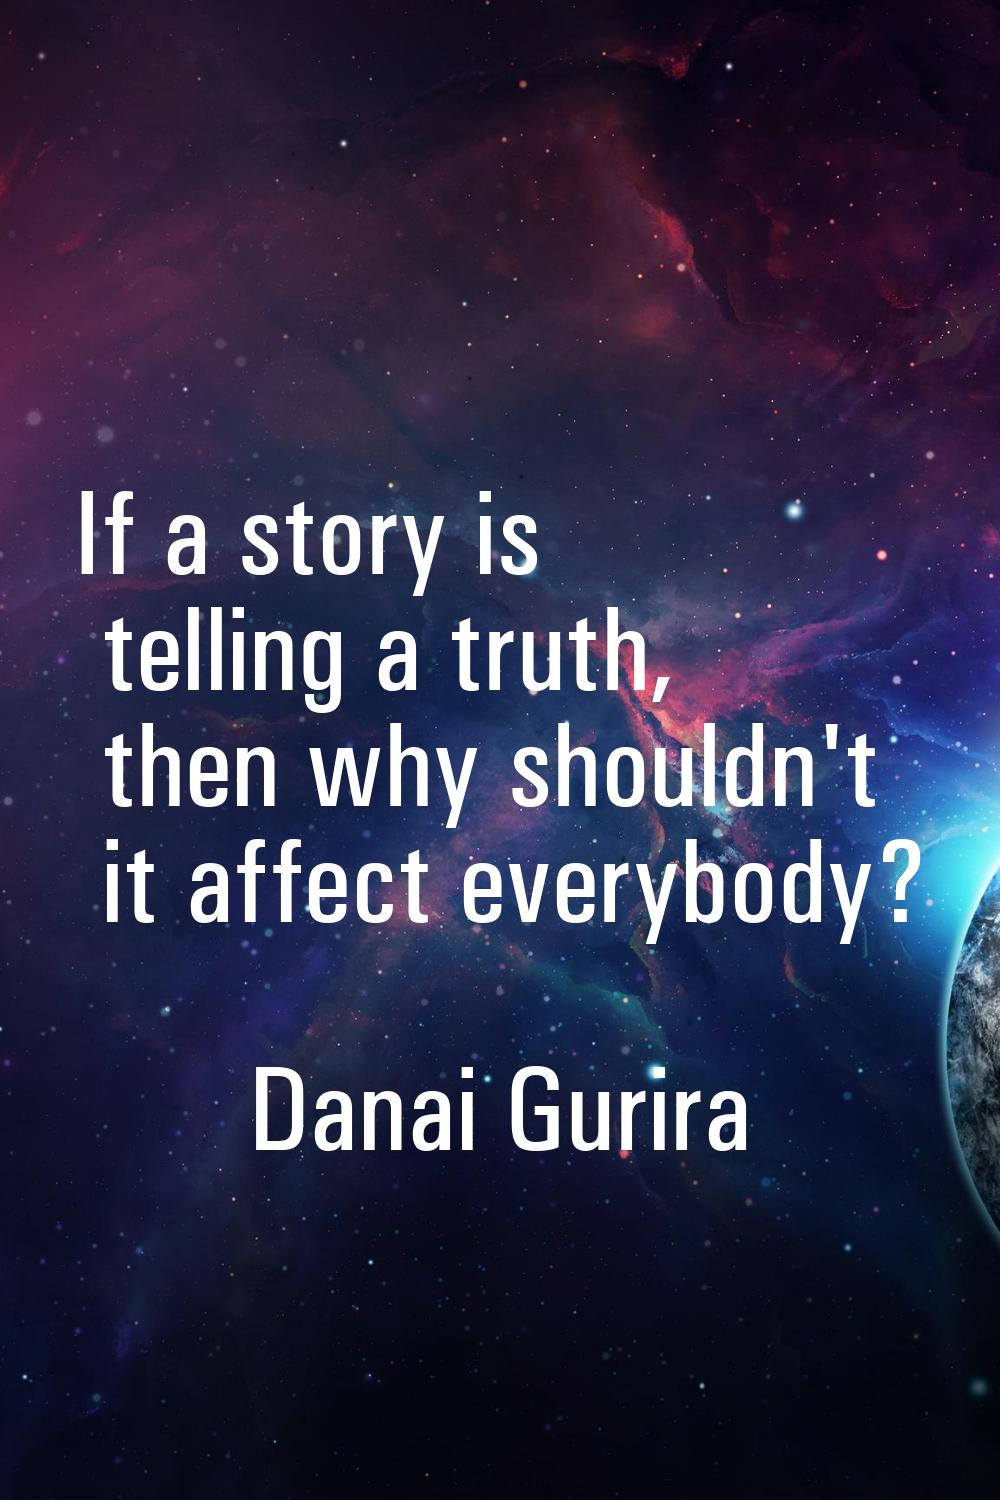 If a story is telling a truth, then why shouldn't it affect everybody?